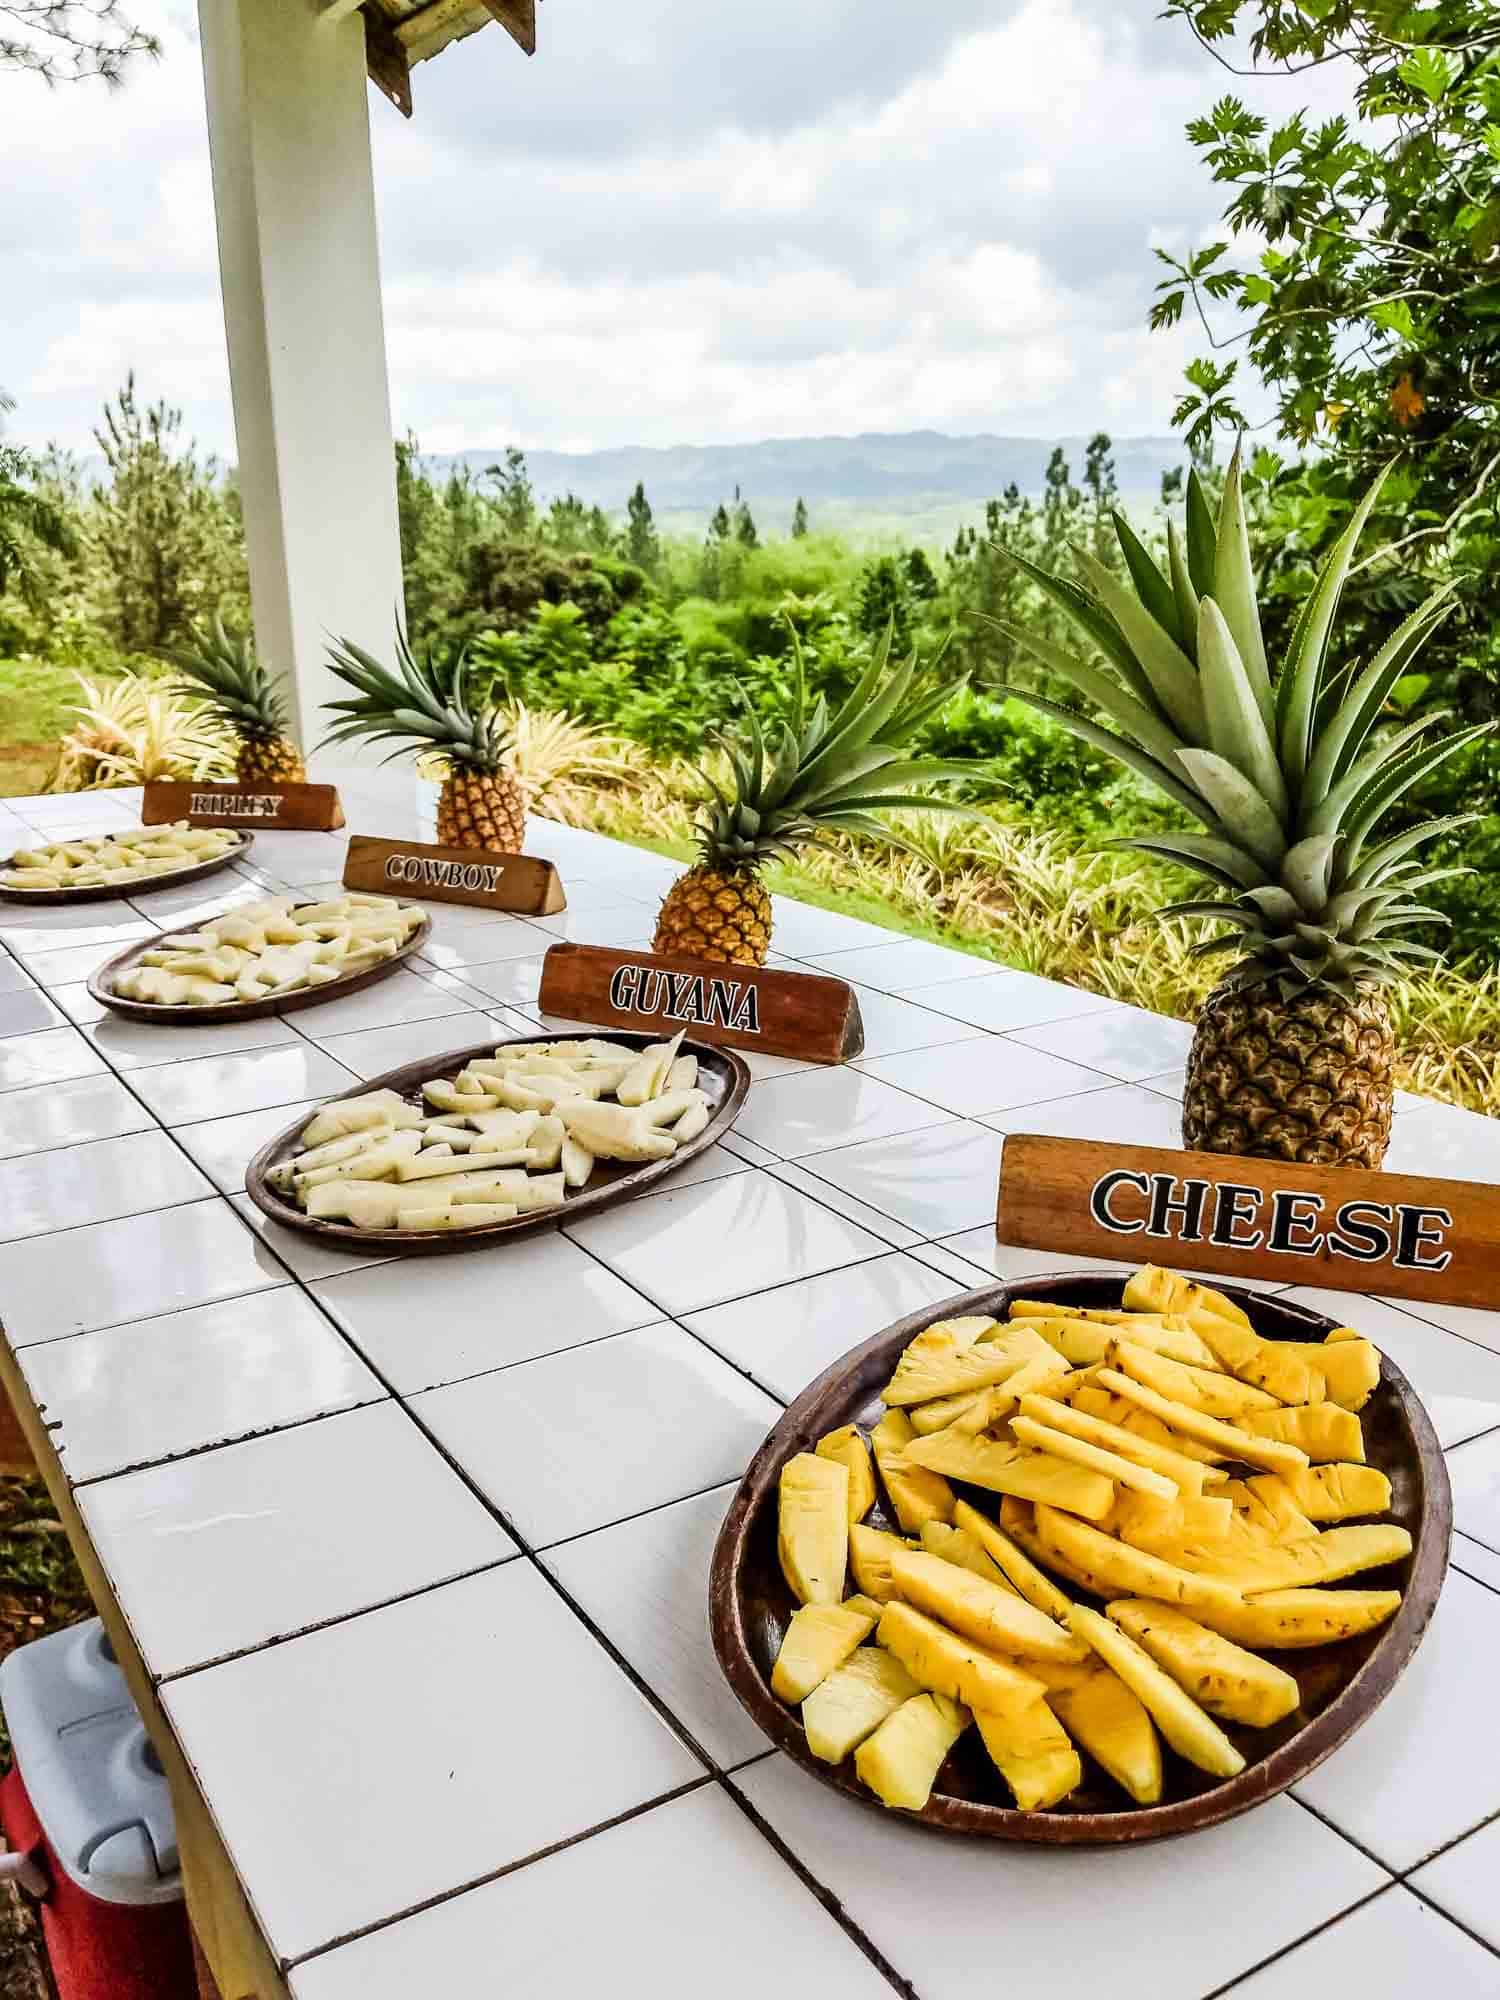 Different types of pineapple displayed in Jamaica